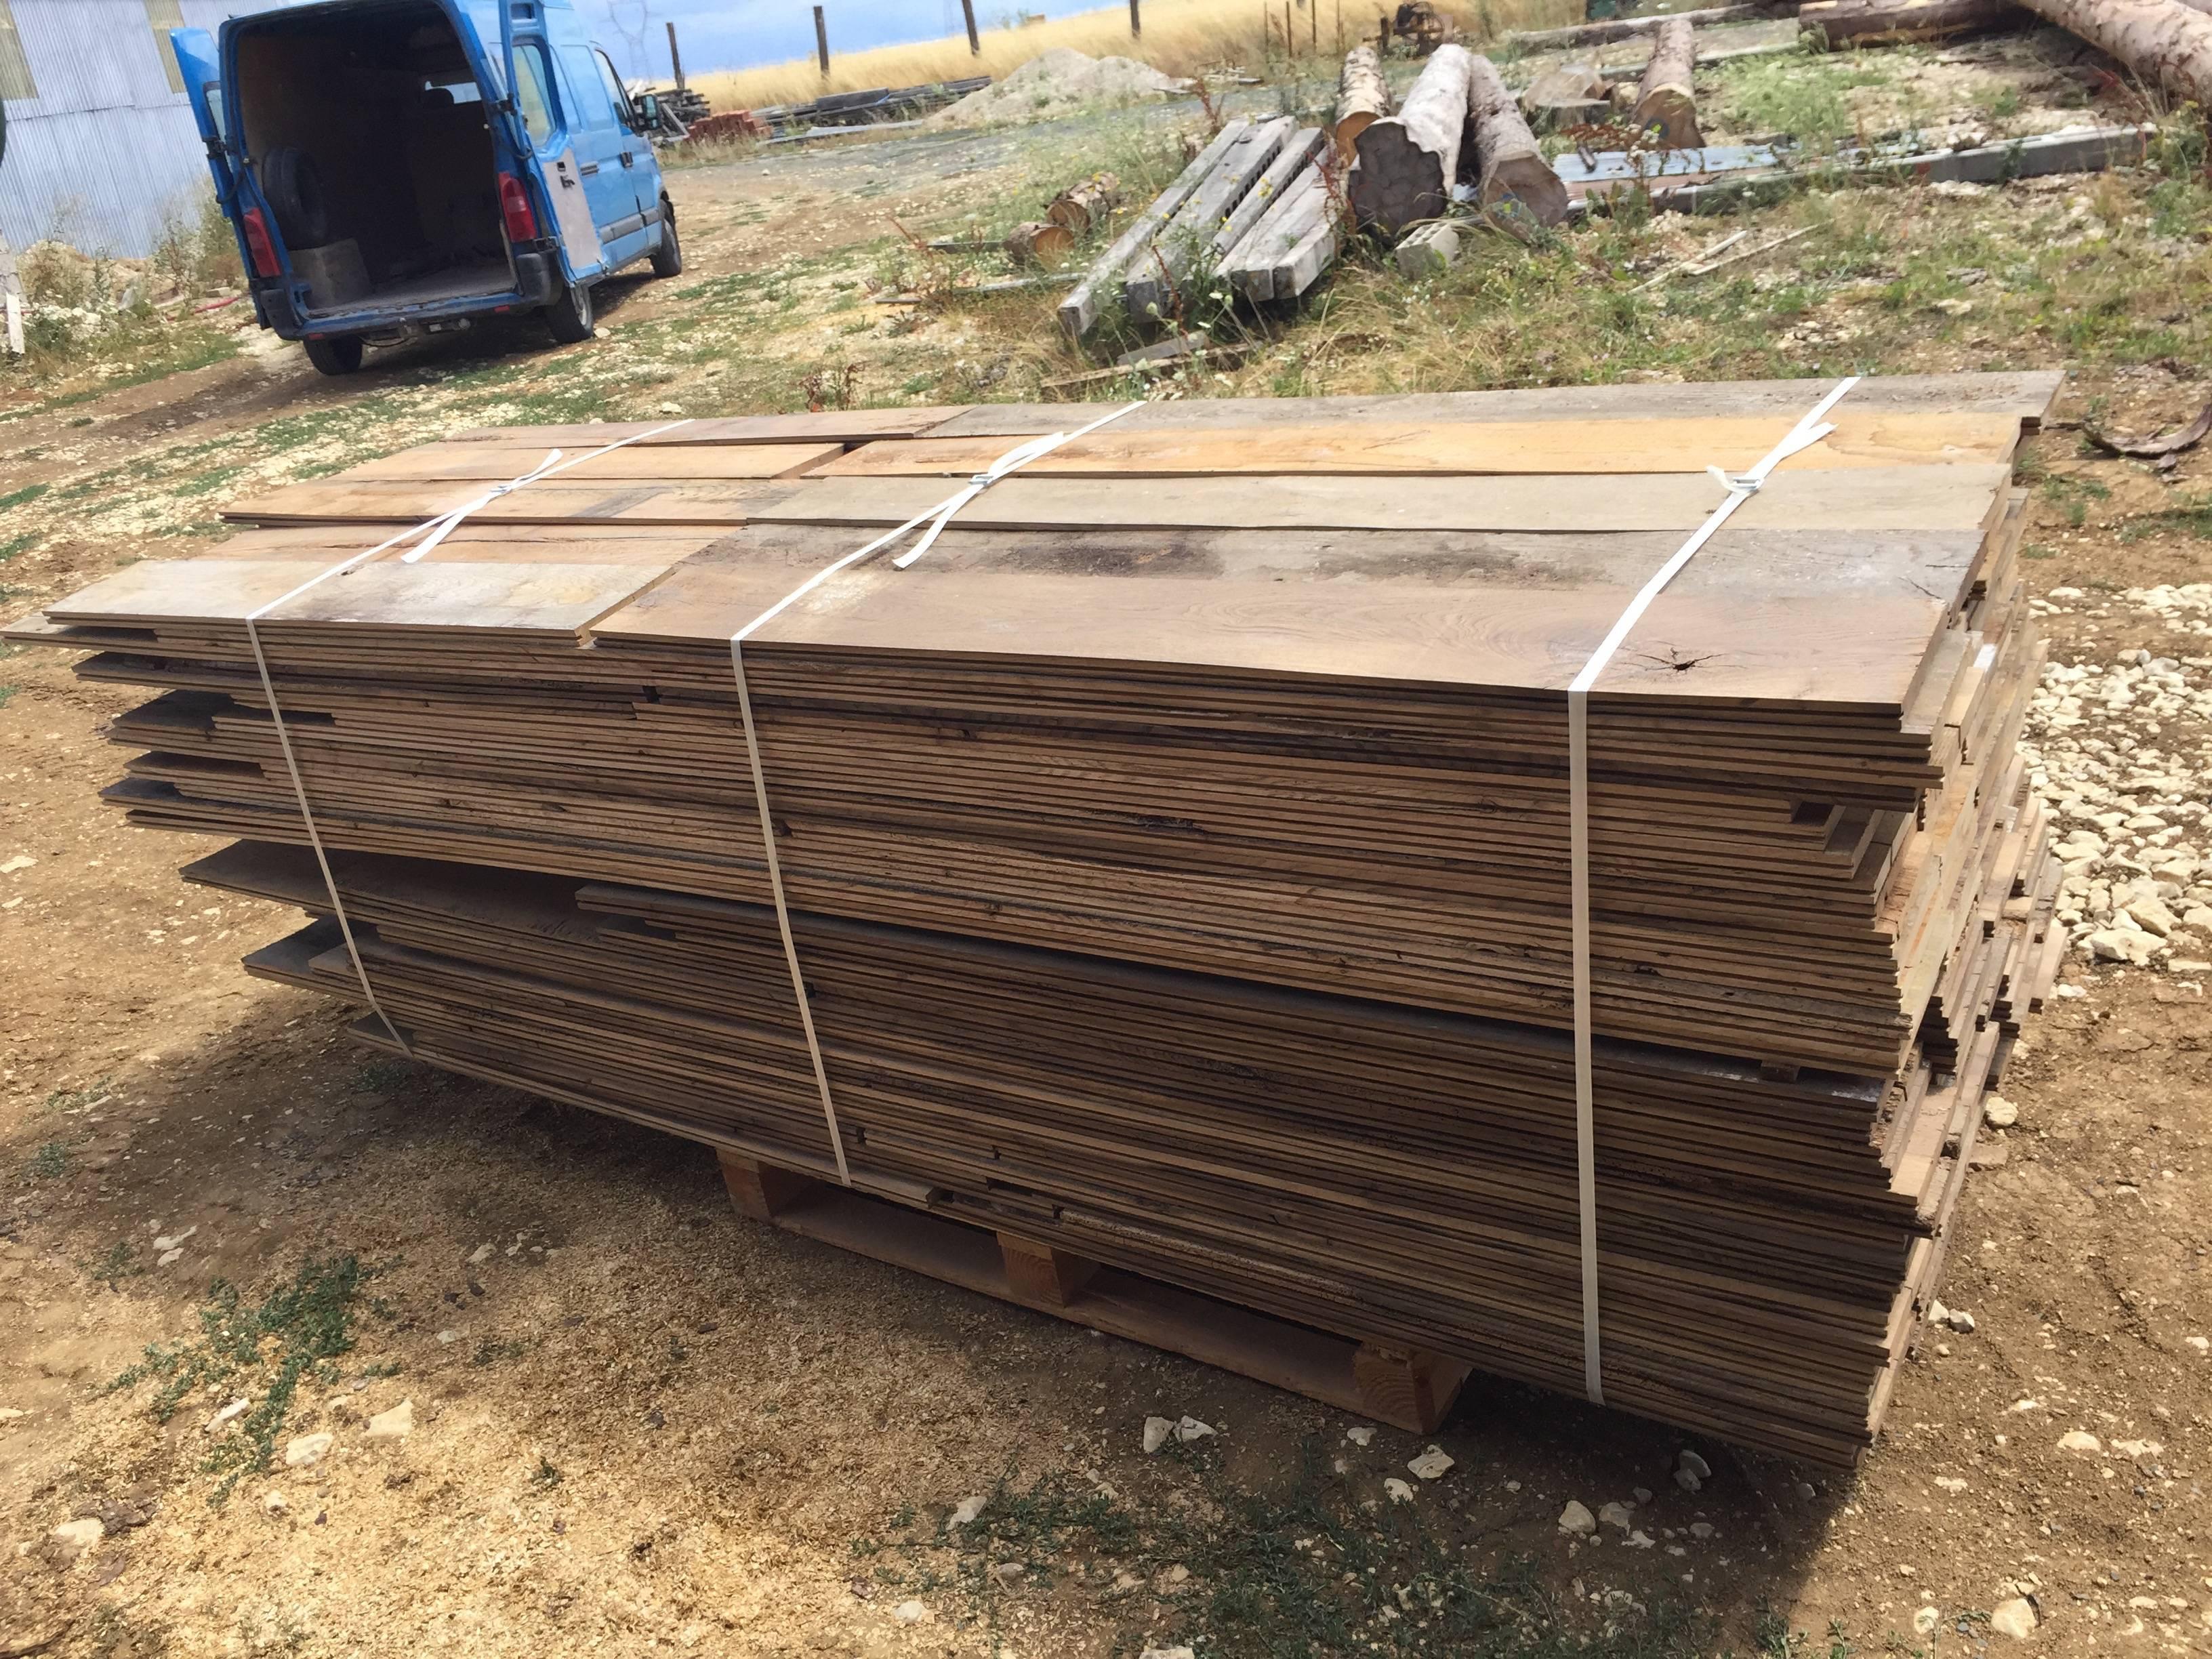 Exceptional, rare and very unique.
Original French antique wood oak floorings.
Ready for installation.
Available right now from our Los Angeles location.
Price is per square foot.
More info on demand.